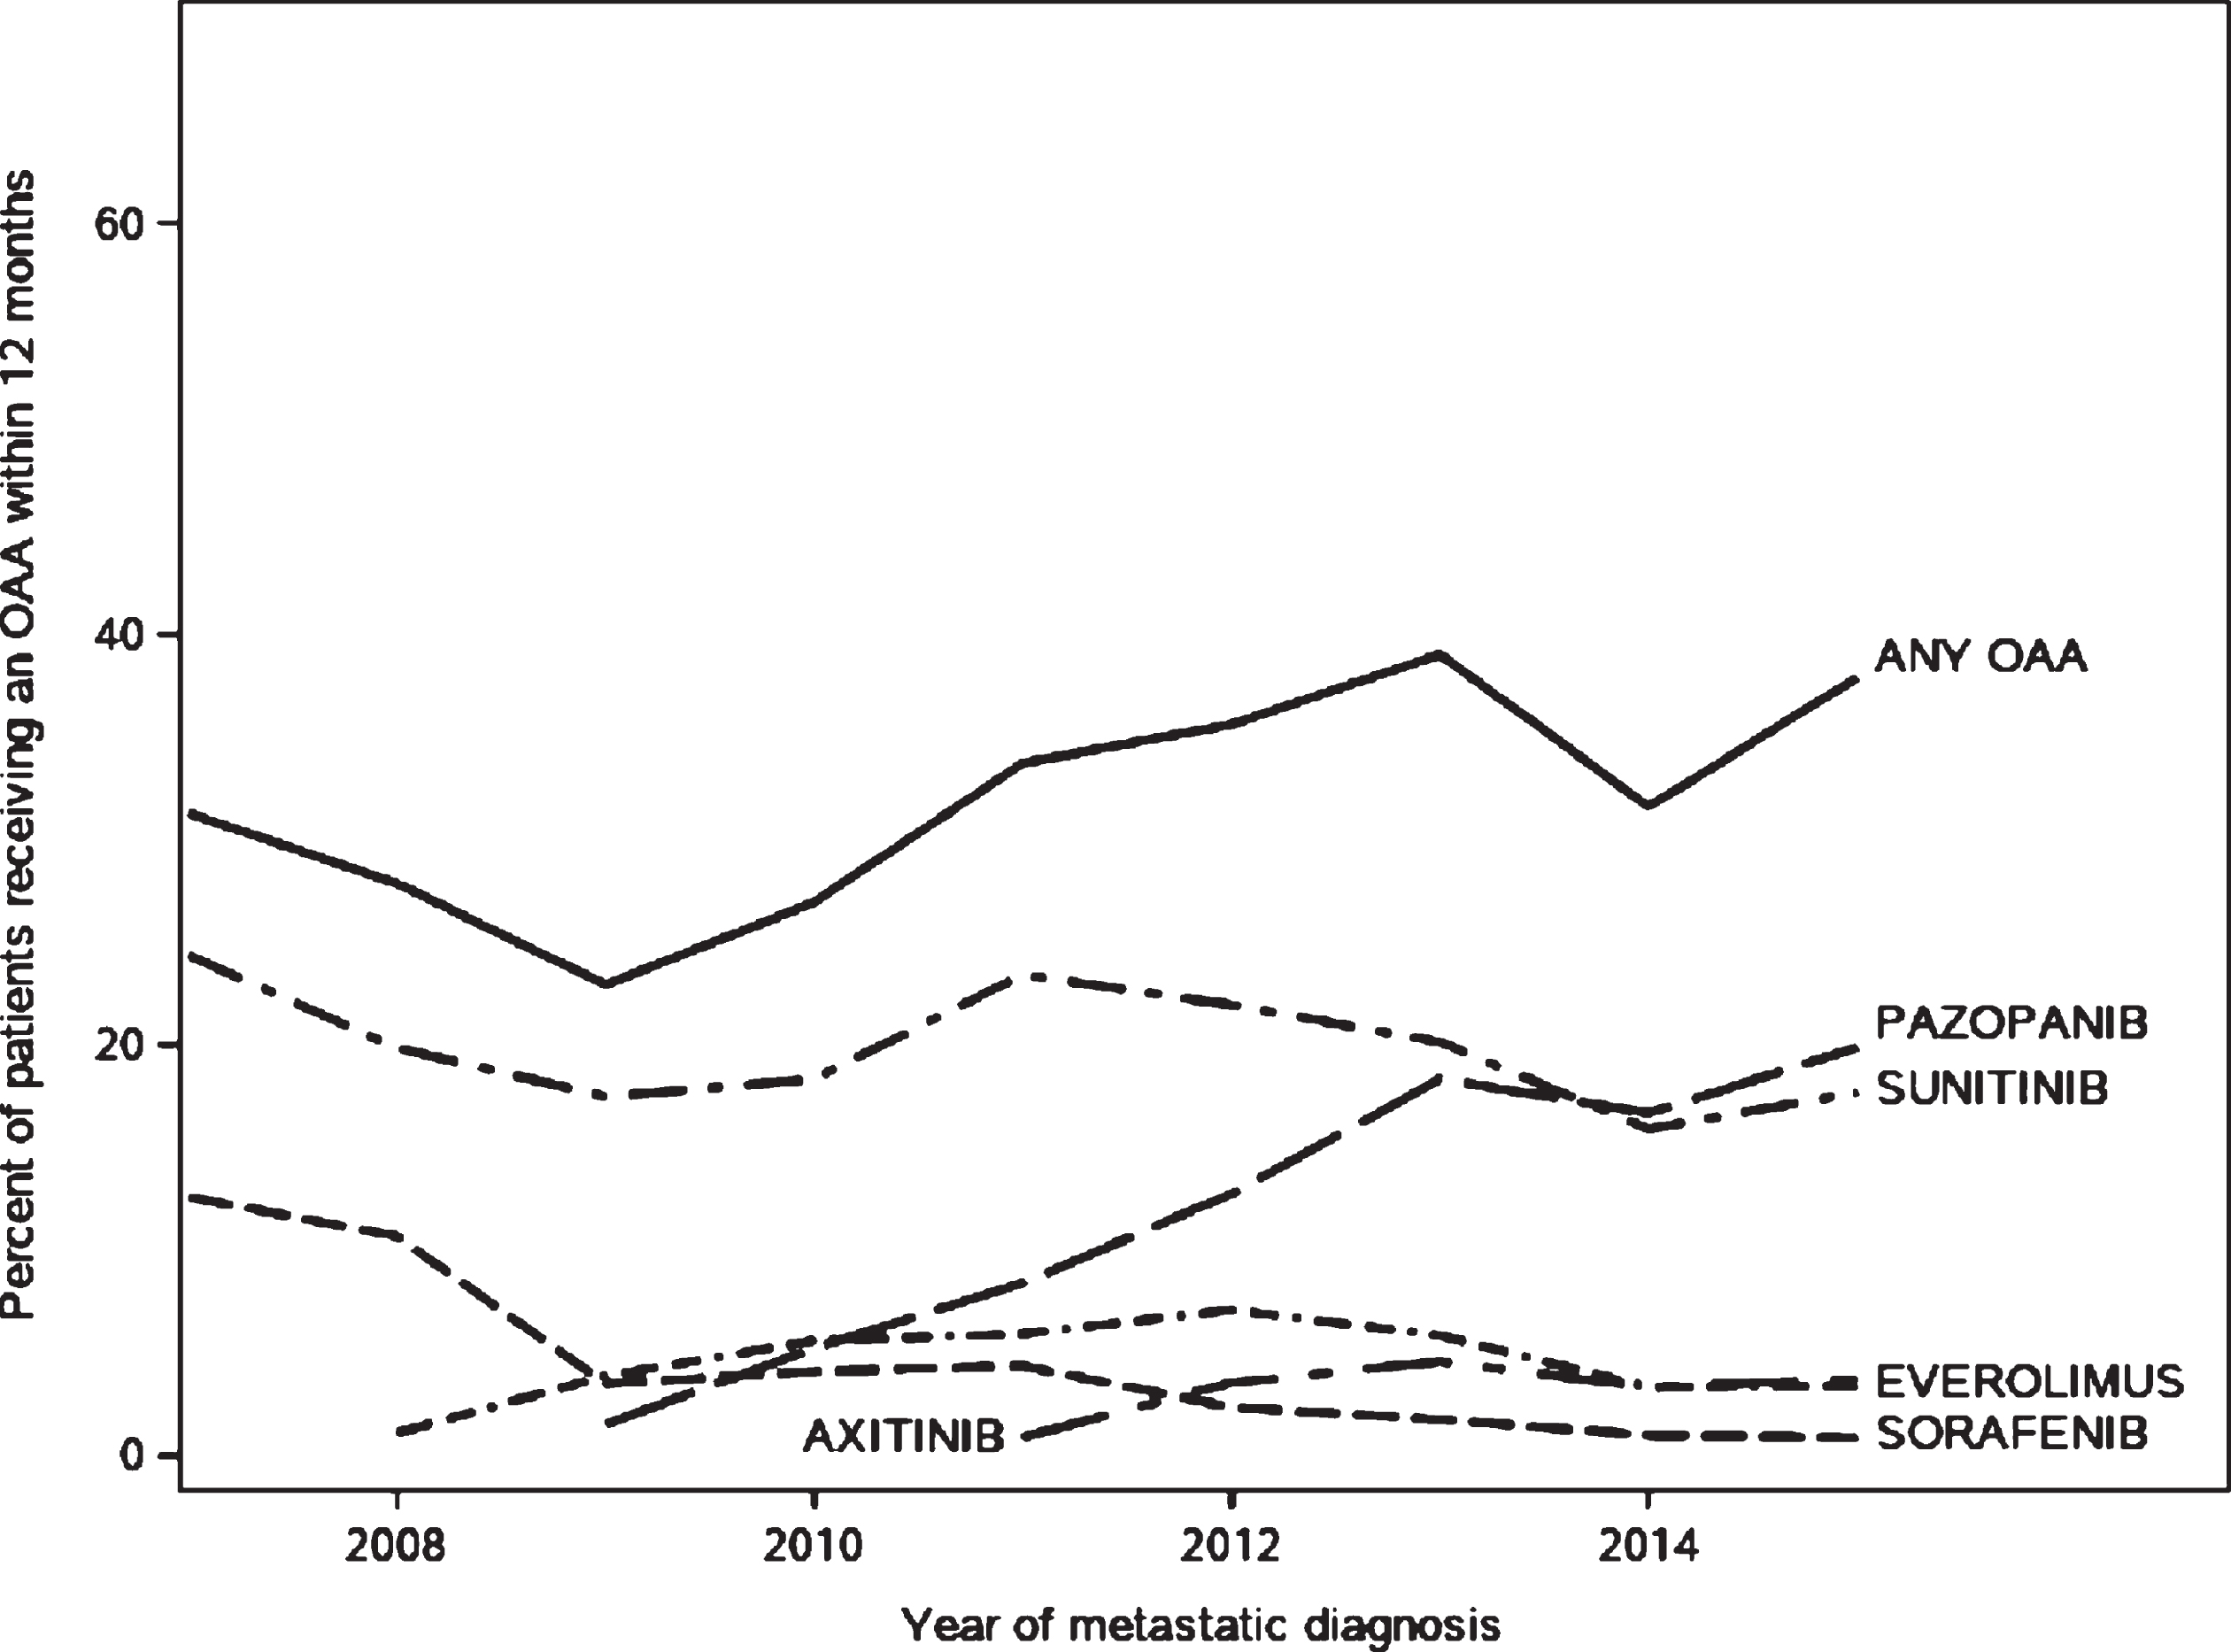 Trends in receipt of oral anticancer agents in the 12 months following diagnosis with metastatic renal cell carcinoma among SEER-Medicare patients aged 65 and older.